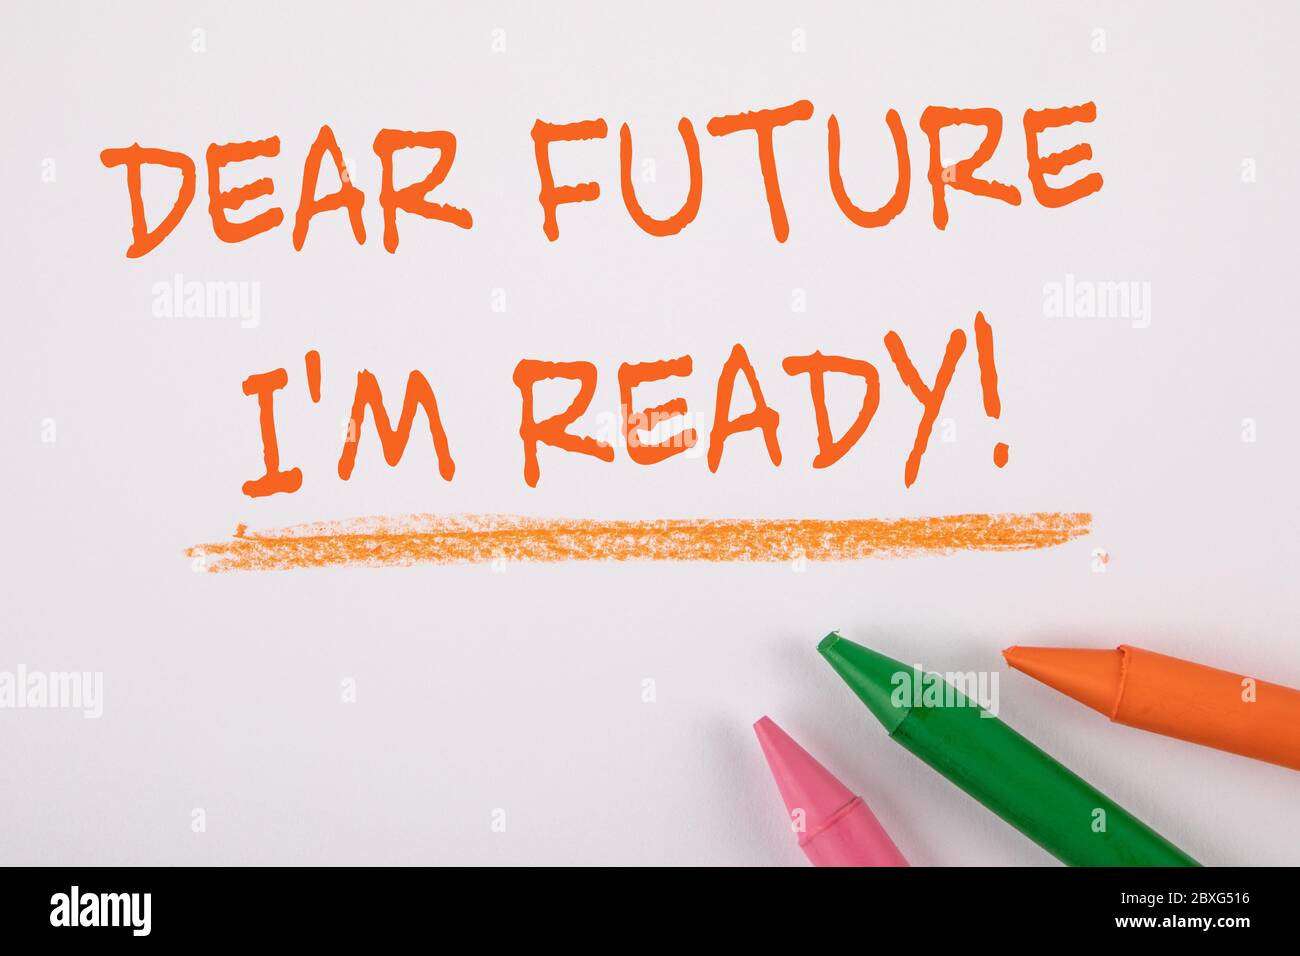 DEAR FUTURE, I AM READY. Text on a white page. Colored pastels Stock Photo